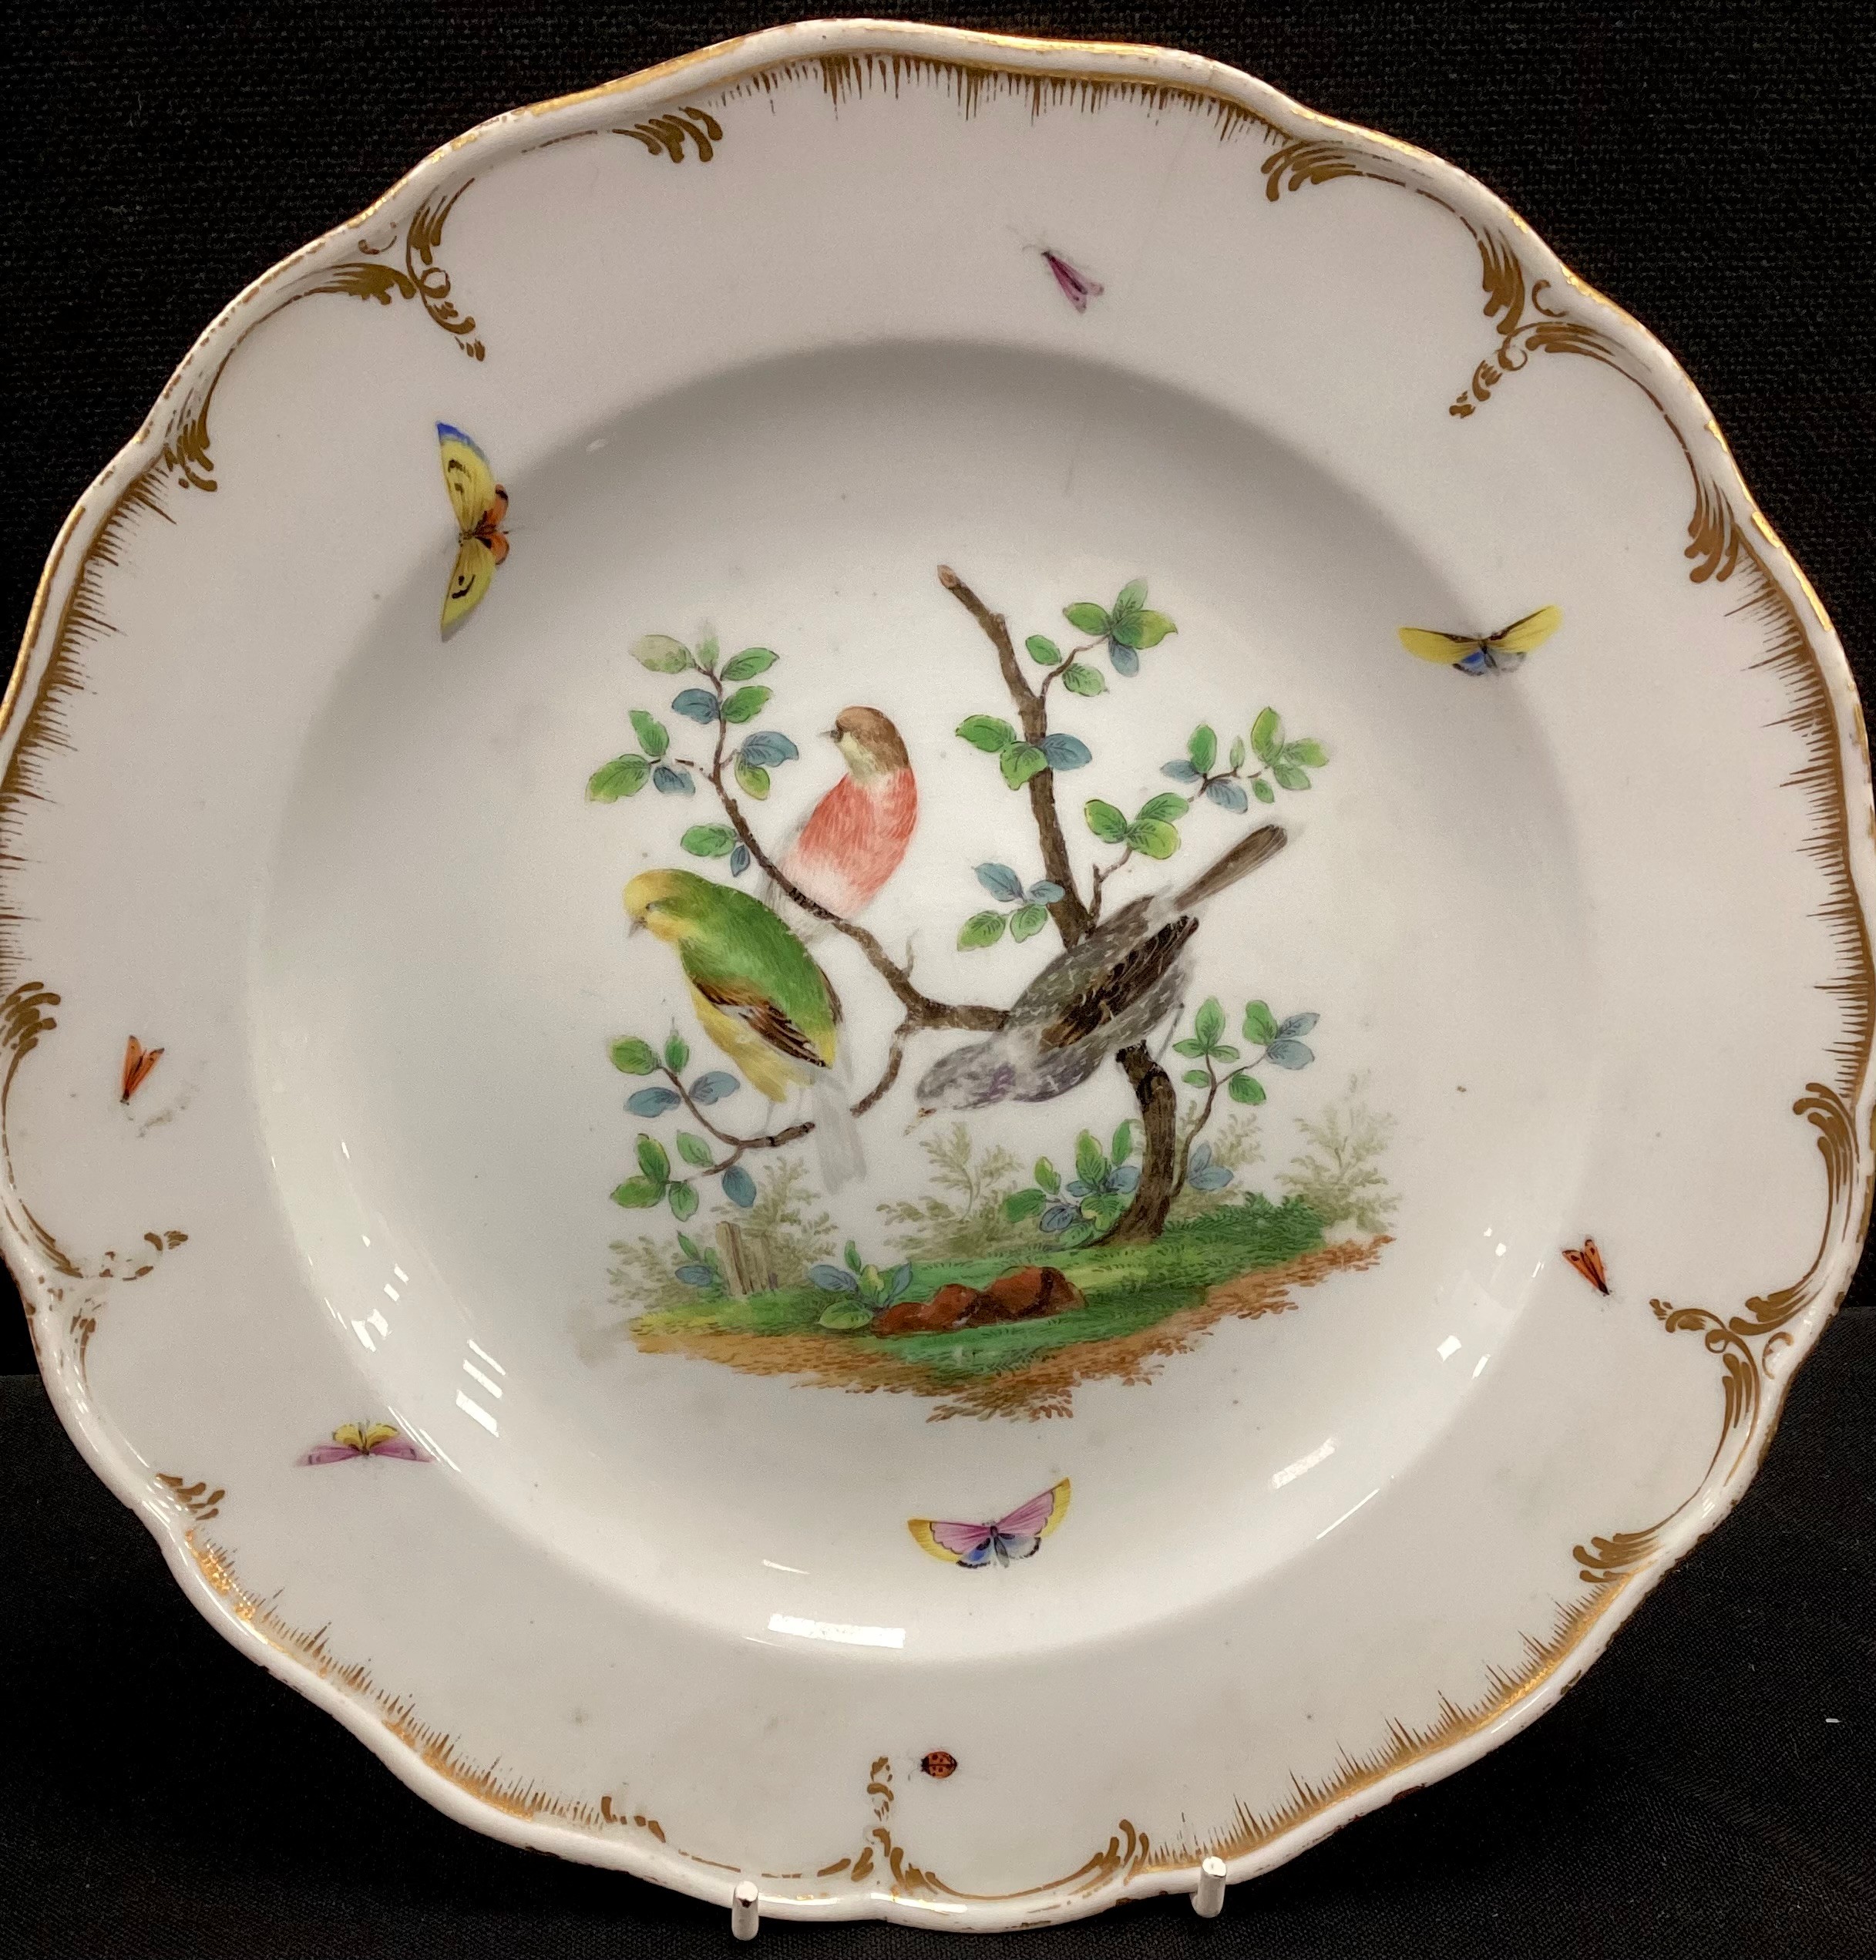 Ceramics - 19th century Meissen porcelain plate, hand painted with birds and insects, gilt border, - Image 3 of 3